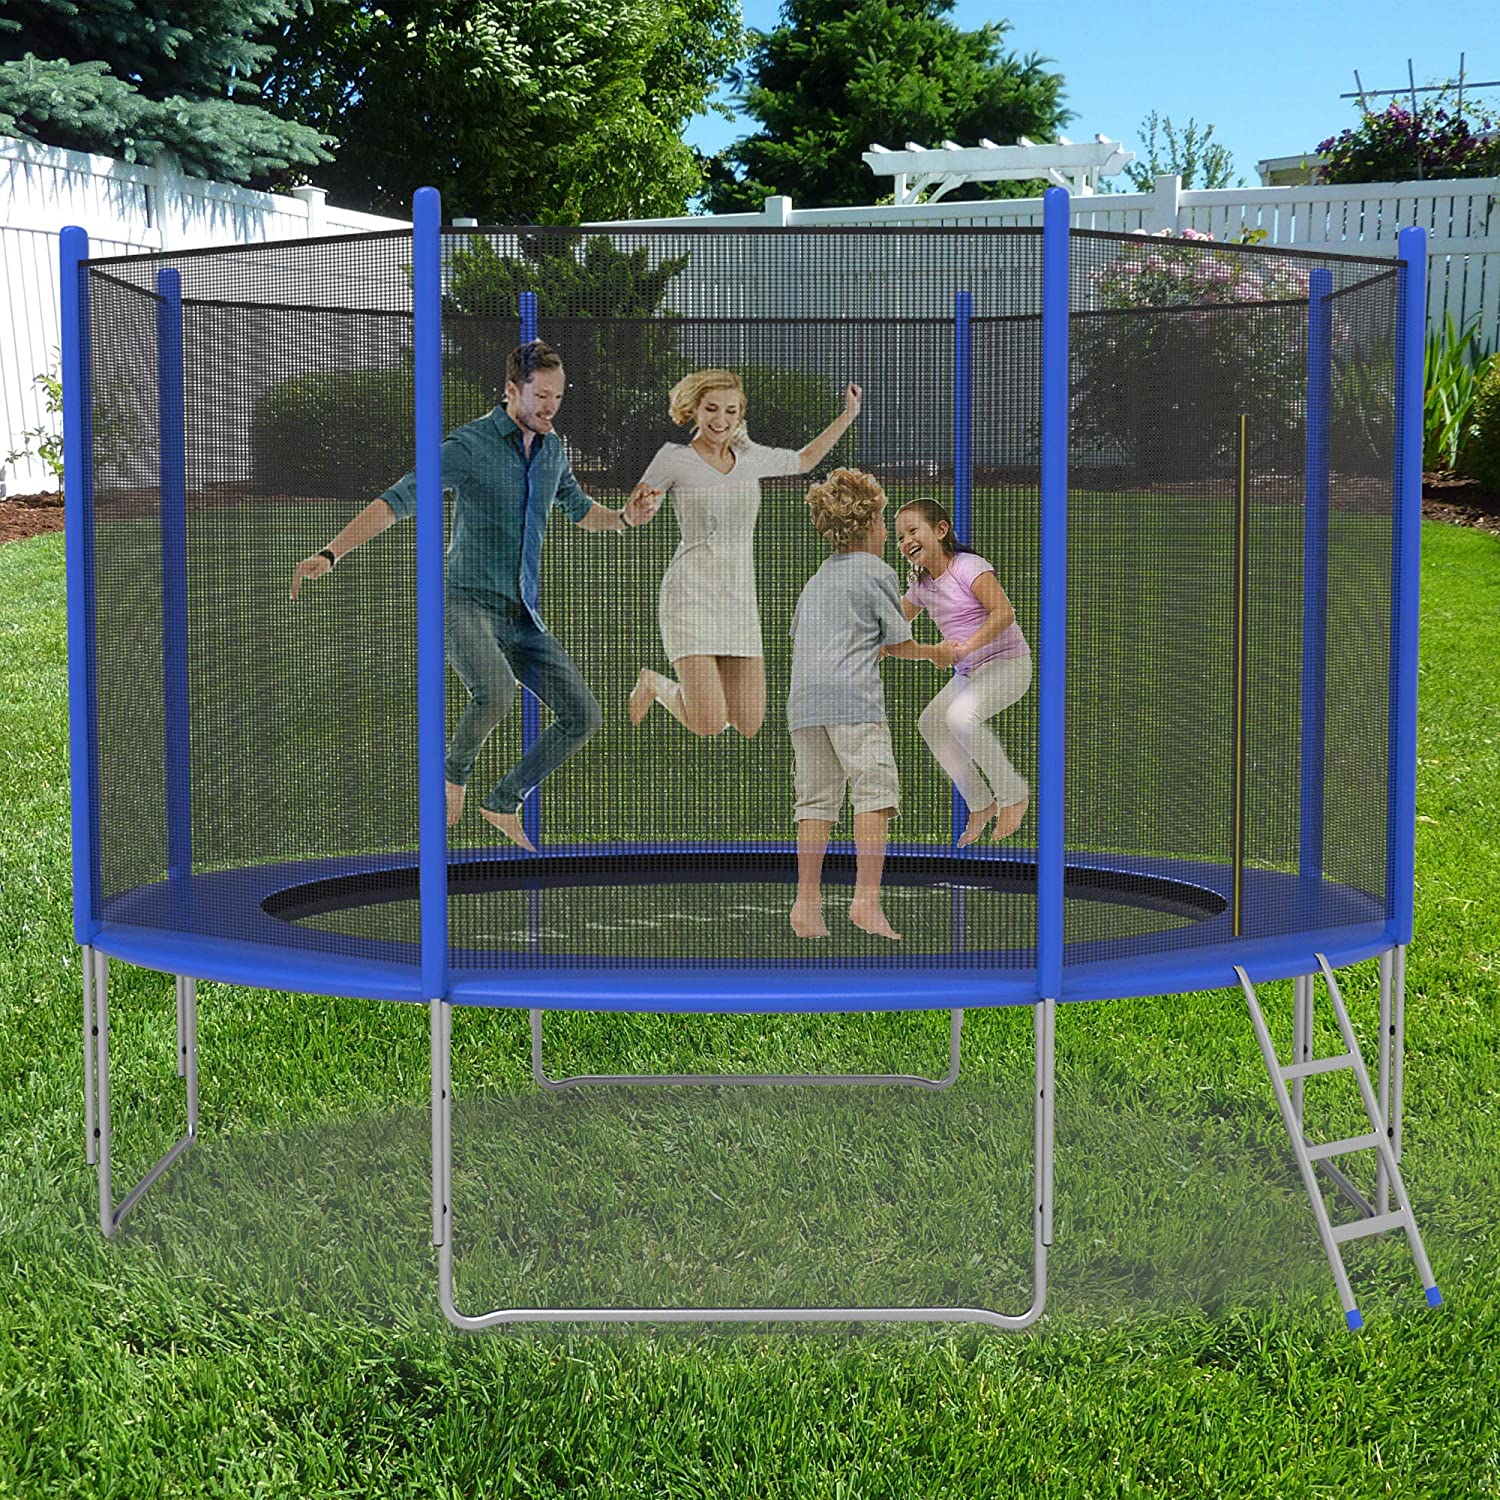 10 FT Recreational Trampoline with Safety Enclosure Net and Ladder and Spring Cover - Outdoor Backyard Bounce Jump Have Fun